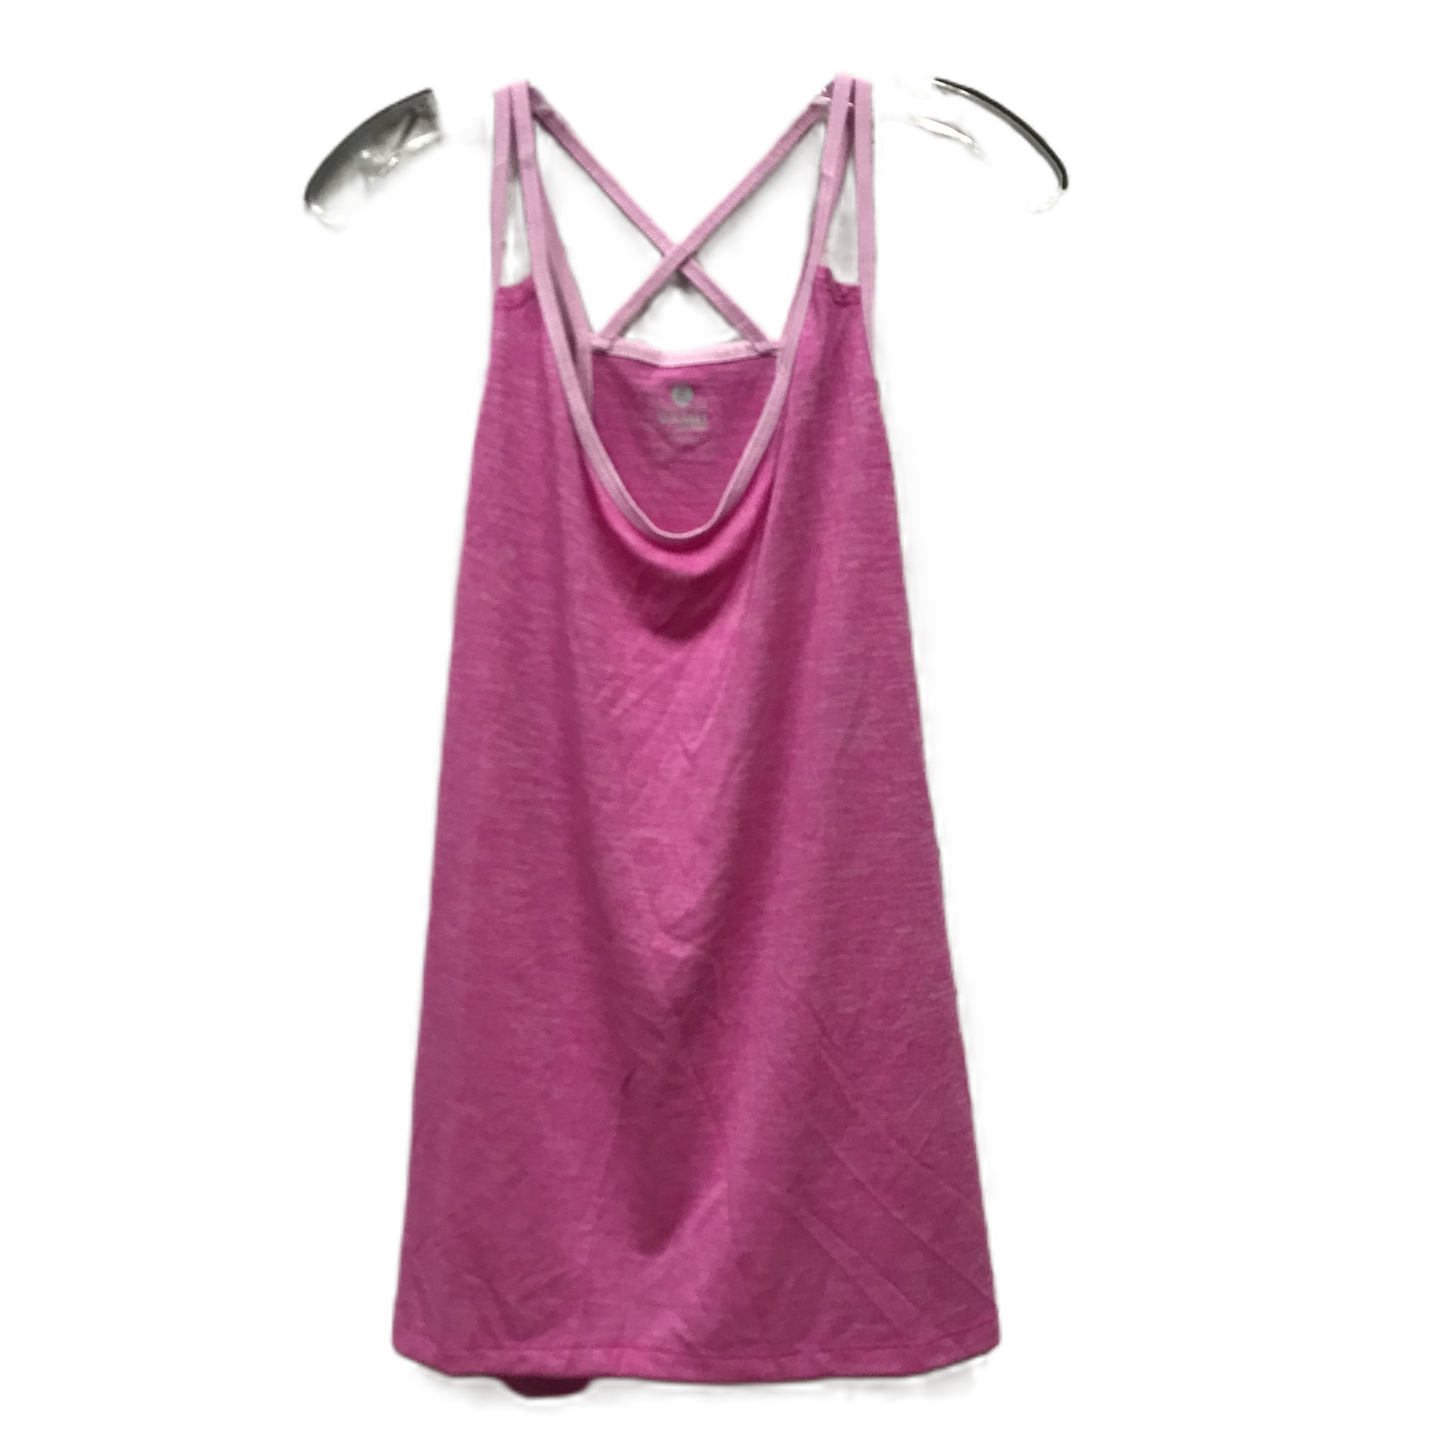 Pink Athletic Tank Top By Old Navy, Size: 2x